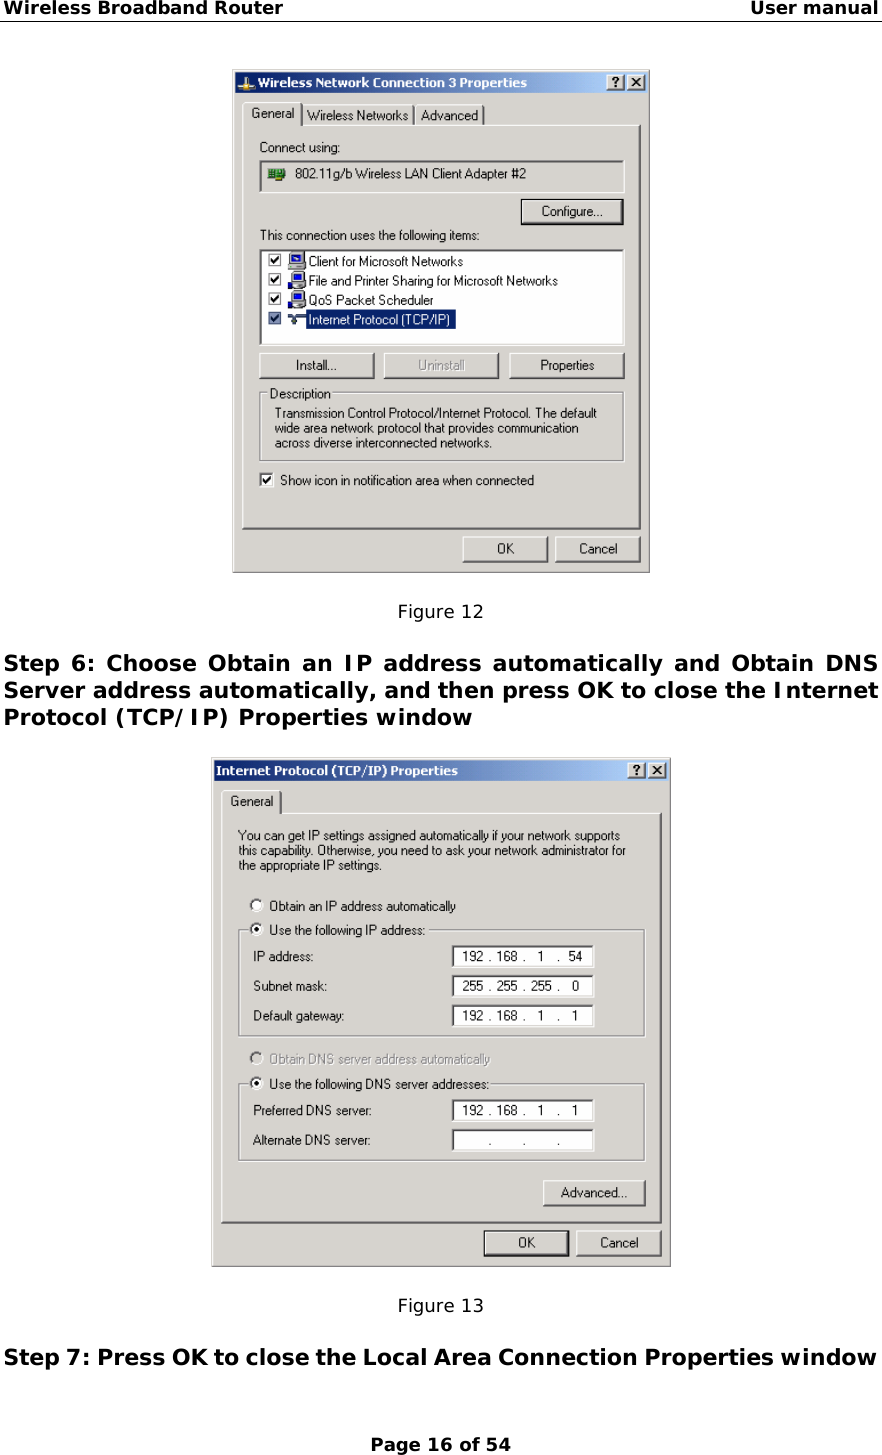 Wireless Broadband Router                                                   User manual Page 16 of 54   Figure 12  Step 6: Choose Obtain an IP address automatically and Obtain DNS Server address automatically, and then press OK to close the Internet Protocol (TCP/IP) Properties window    Figure 13  Step 7: Press OK to close the Local Area Connection Properties window 